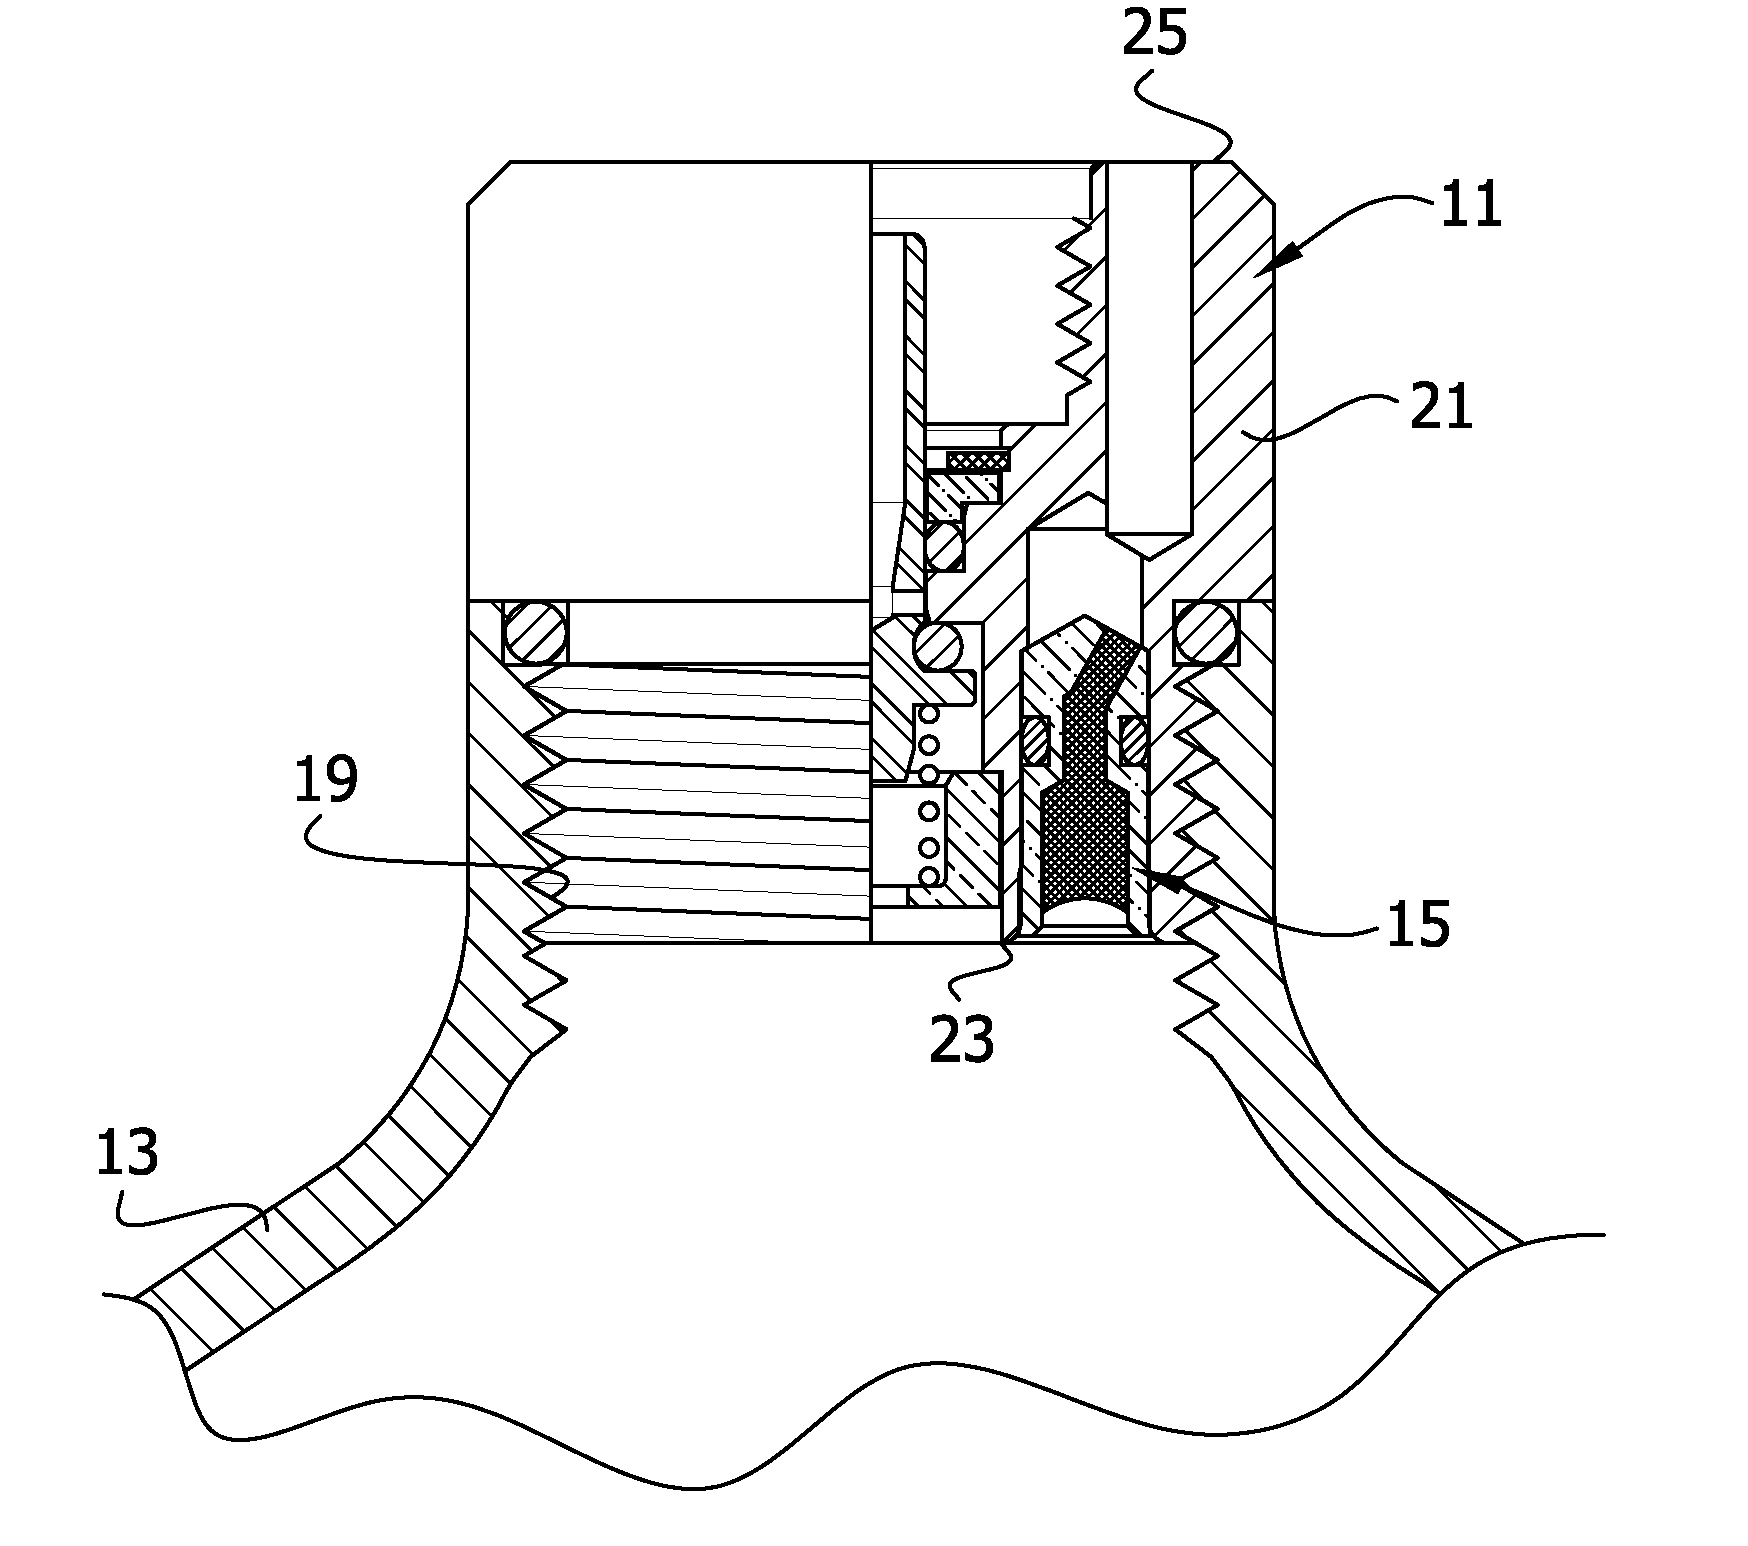 Cylinder valve with thermal relief feature